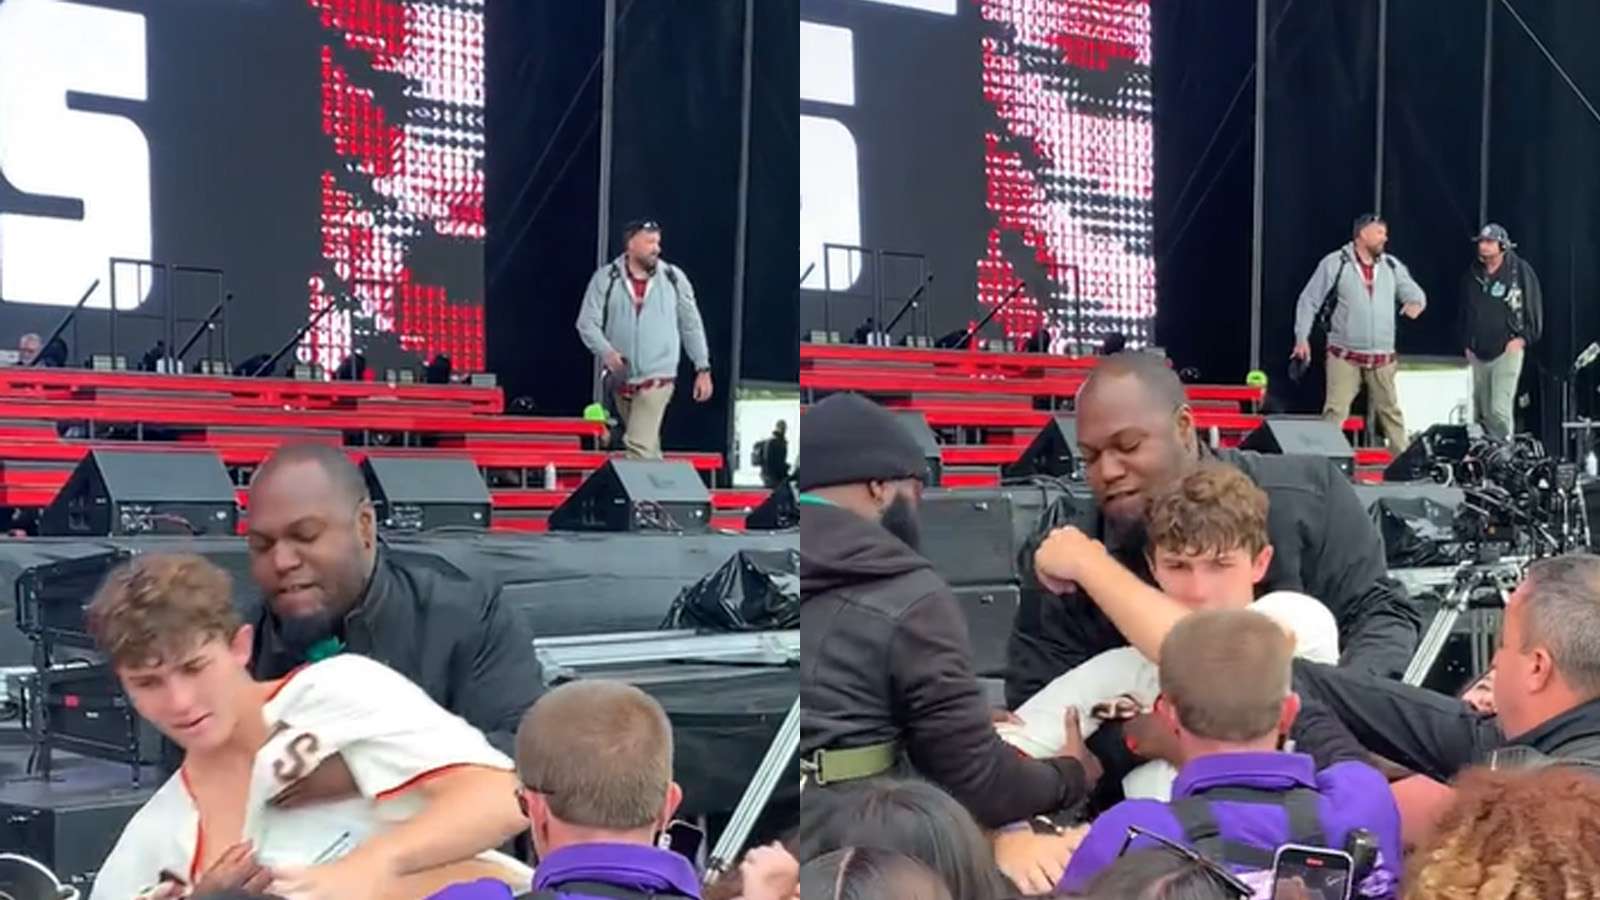 Security remove disruptive Tory Lanez fans from Megan Thee Stallion performance